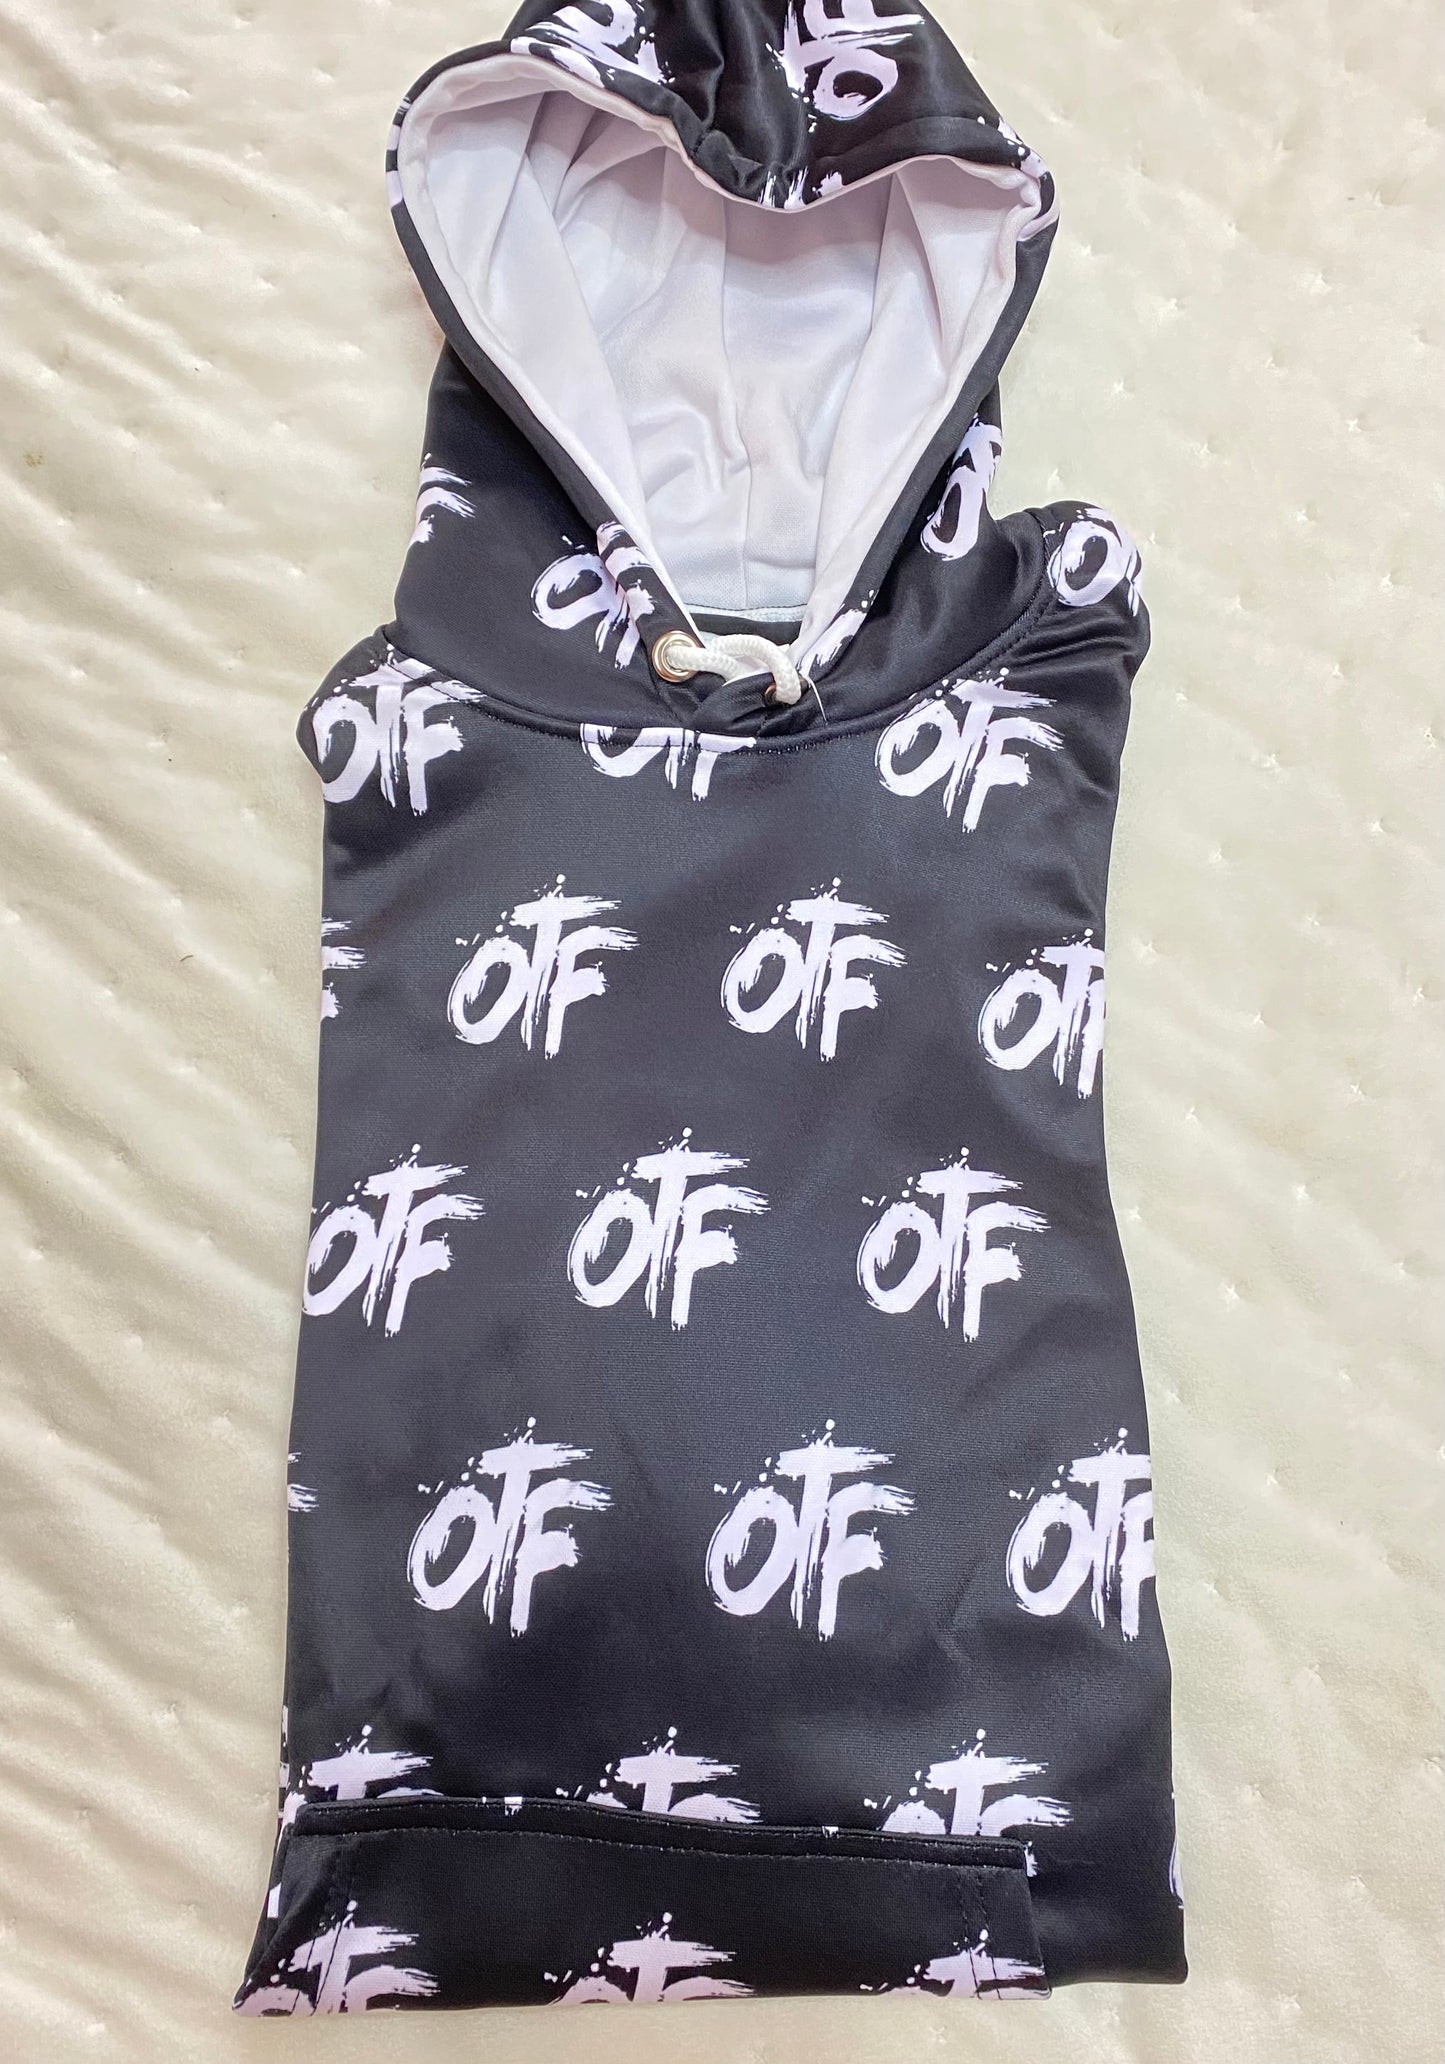 OTF All Over Me Hoodie